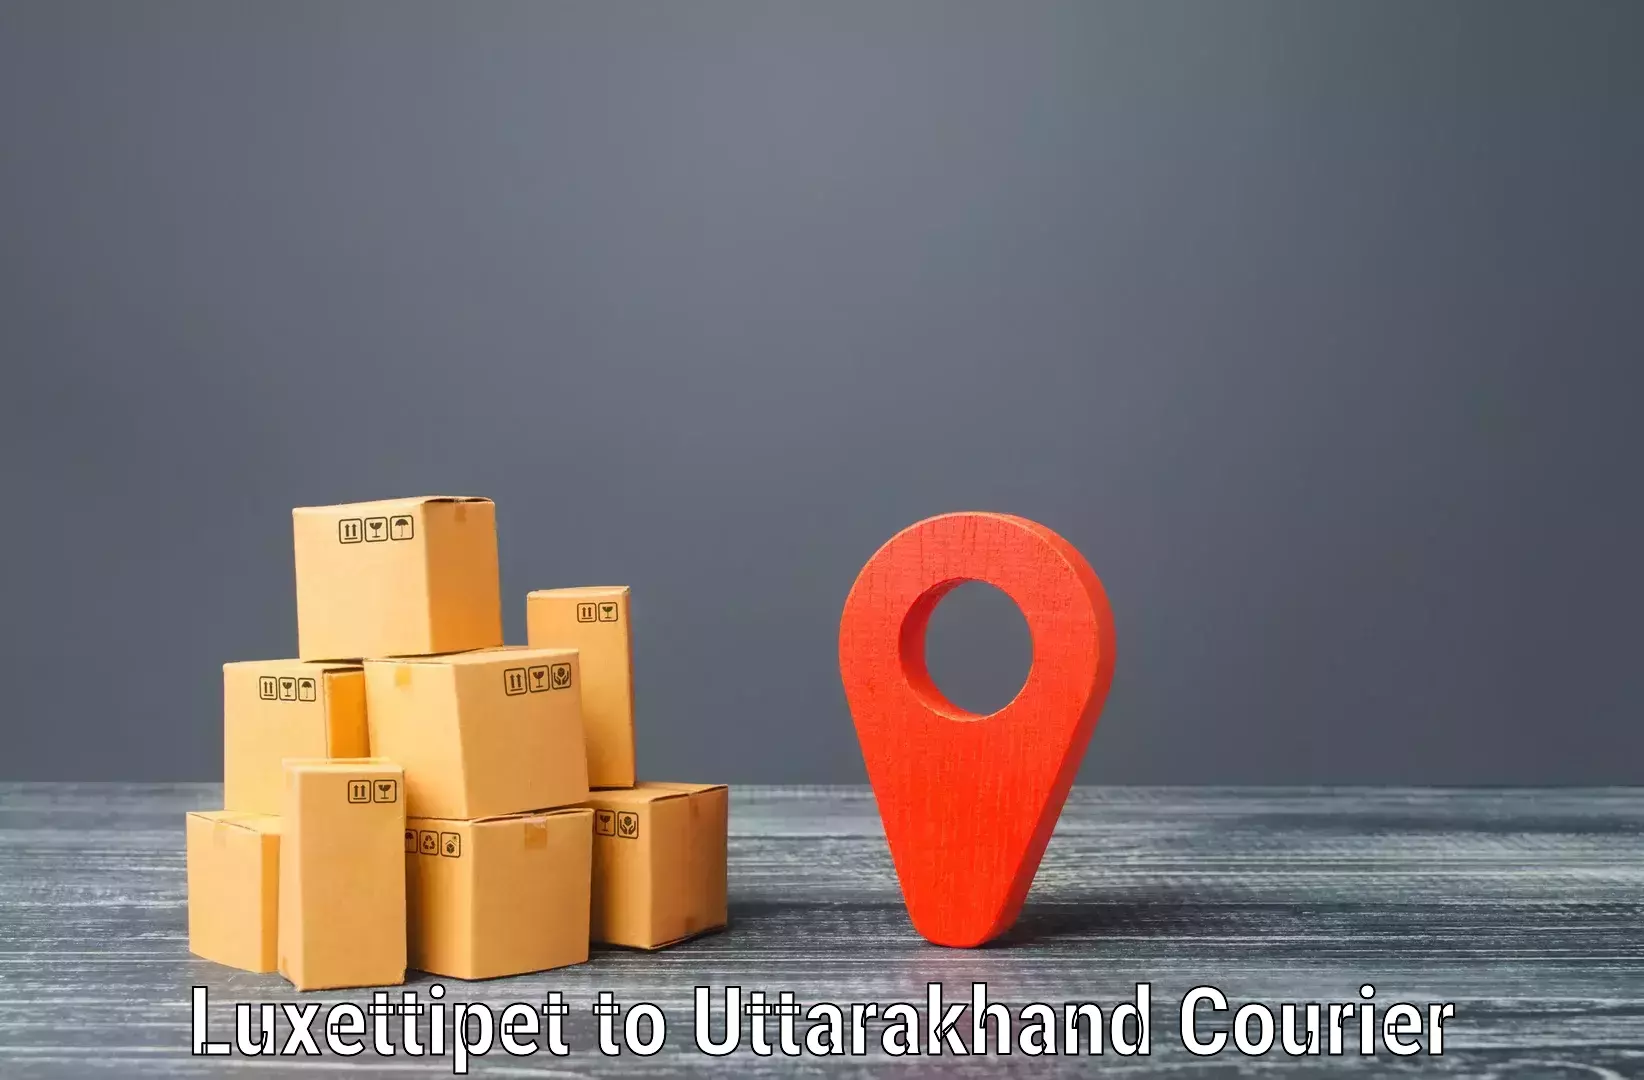 Efficient freight transportation Luxettipet to Pithoragarh